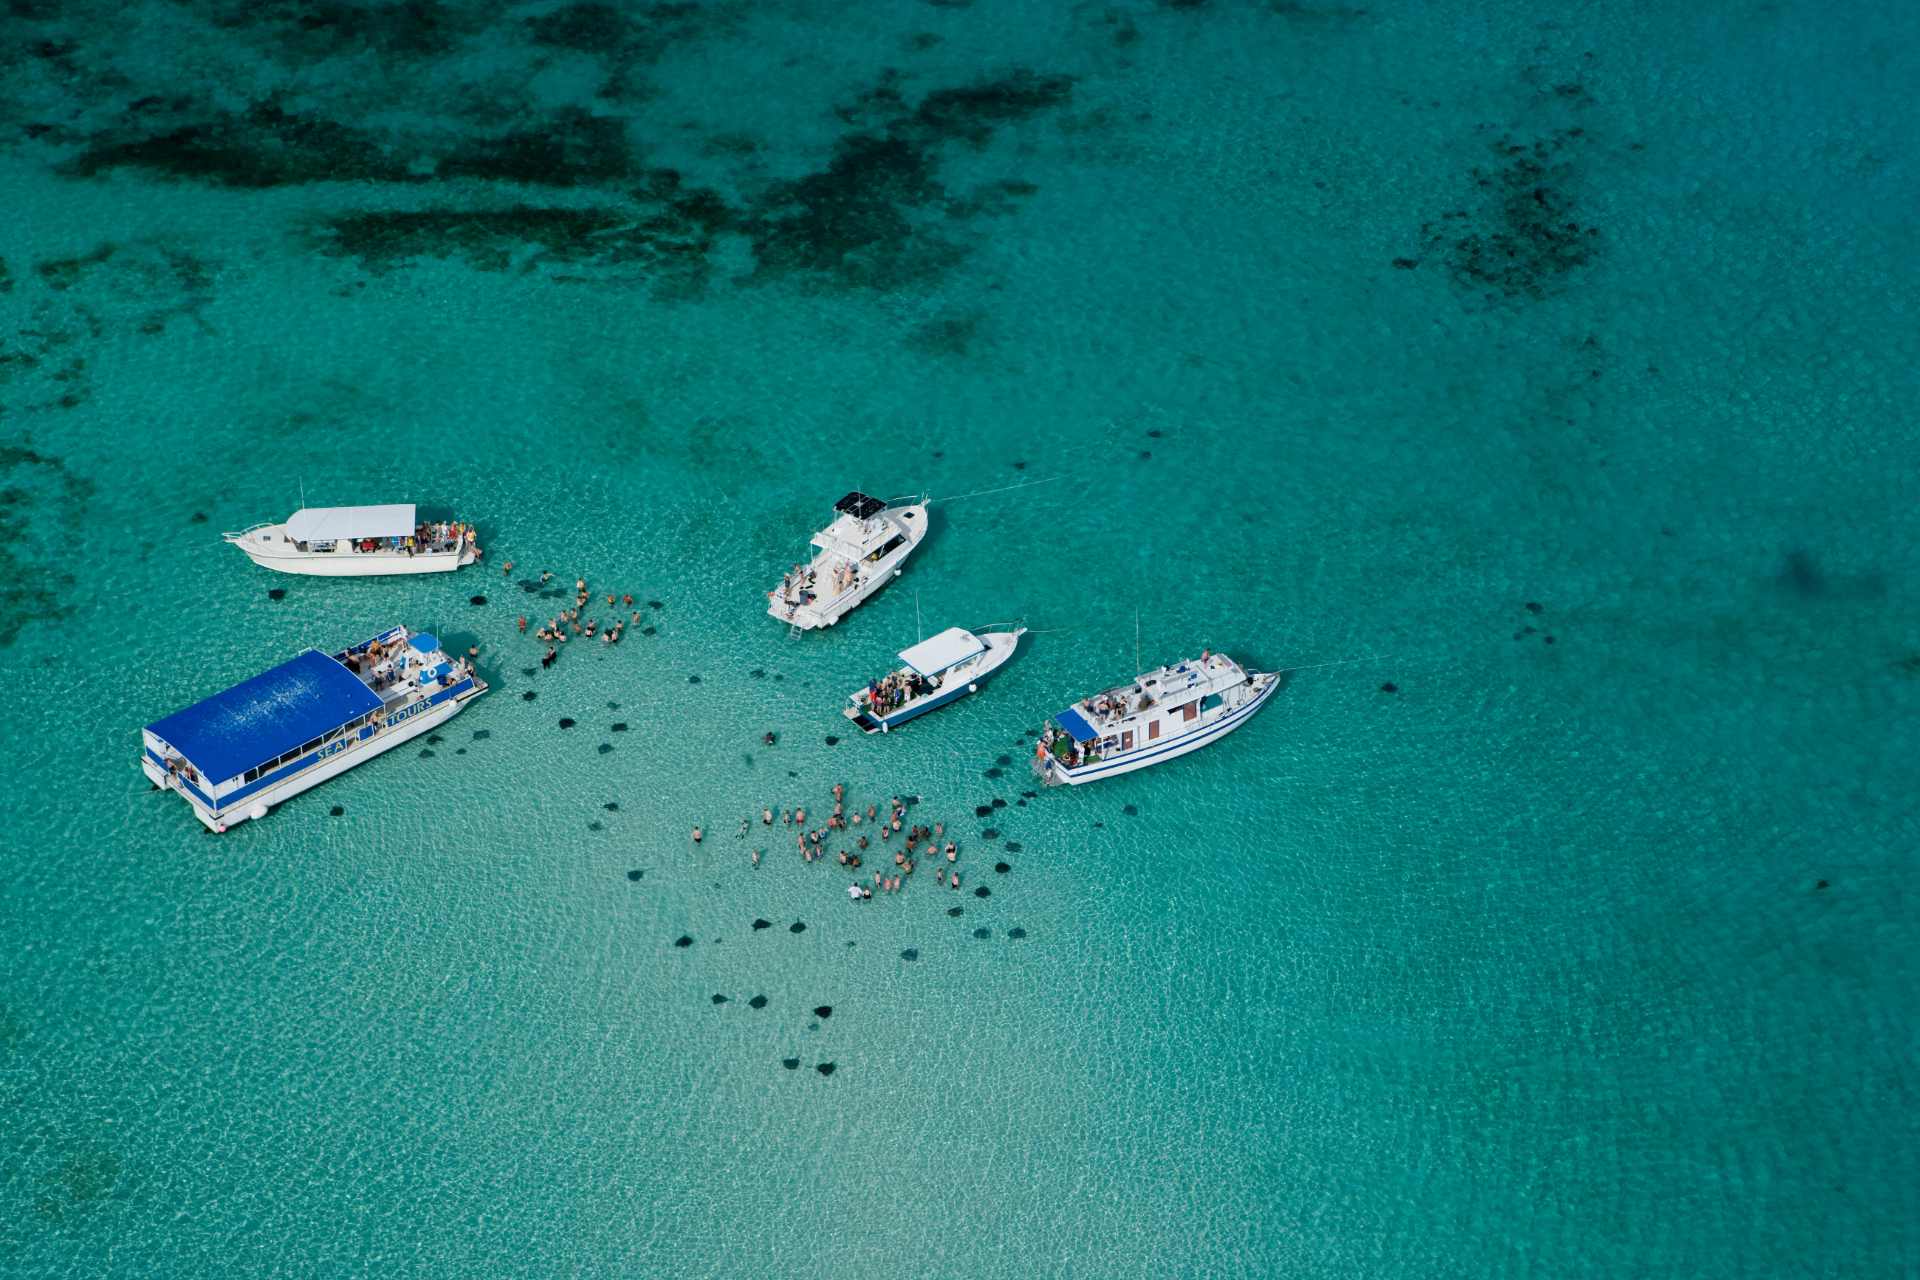 boats and people at Stingray City with drone view